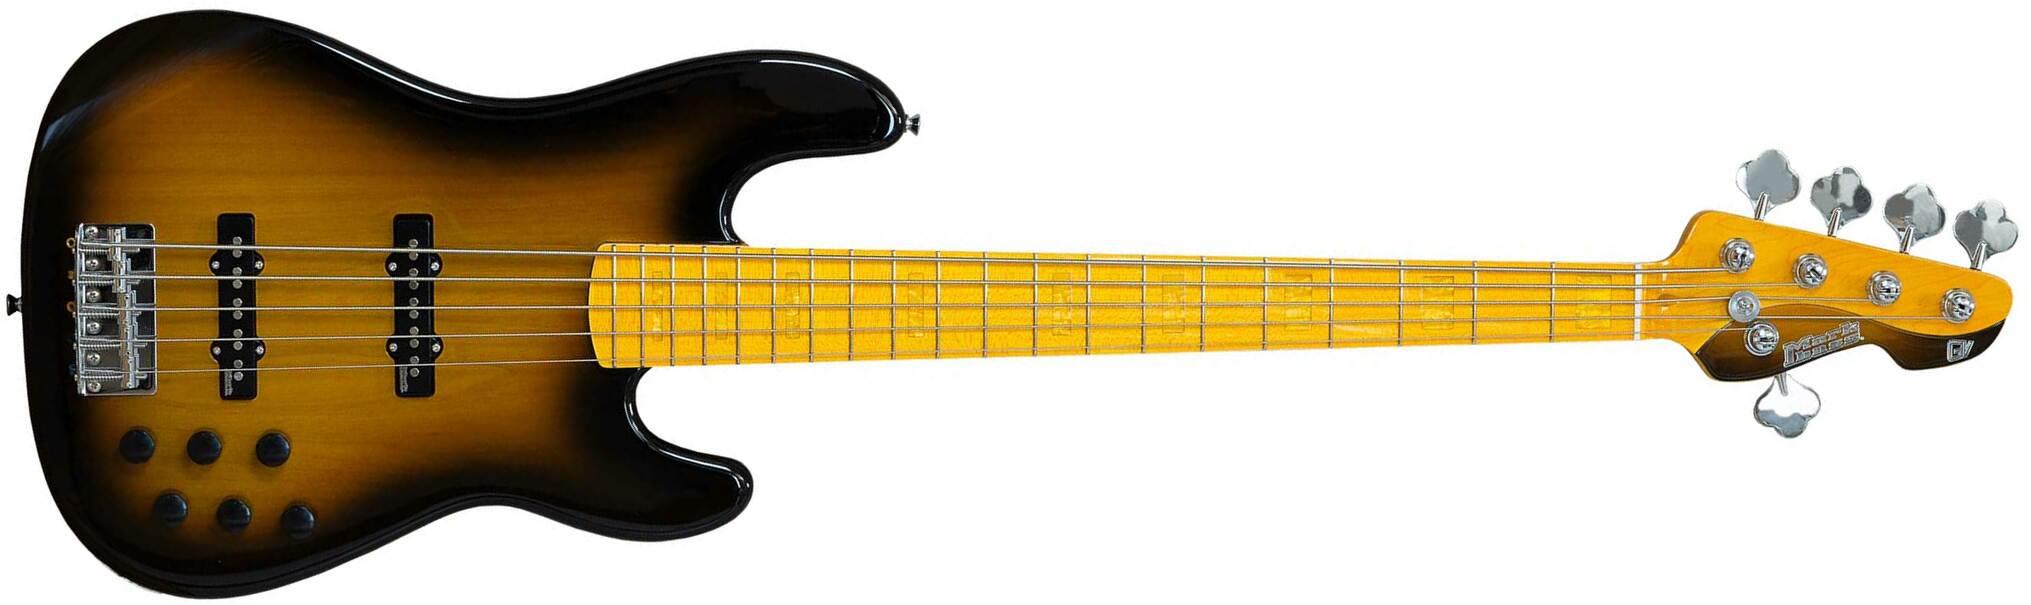 Markbass Mb Gv 5 Gloxy Val Cr Mp 5c Active Mn - Tobacco Sunburst - Solid body electric bass - Main picture